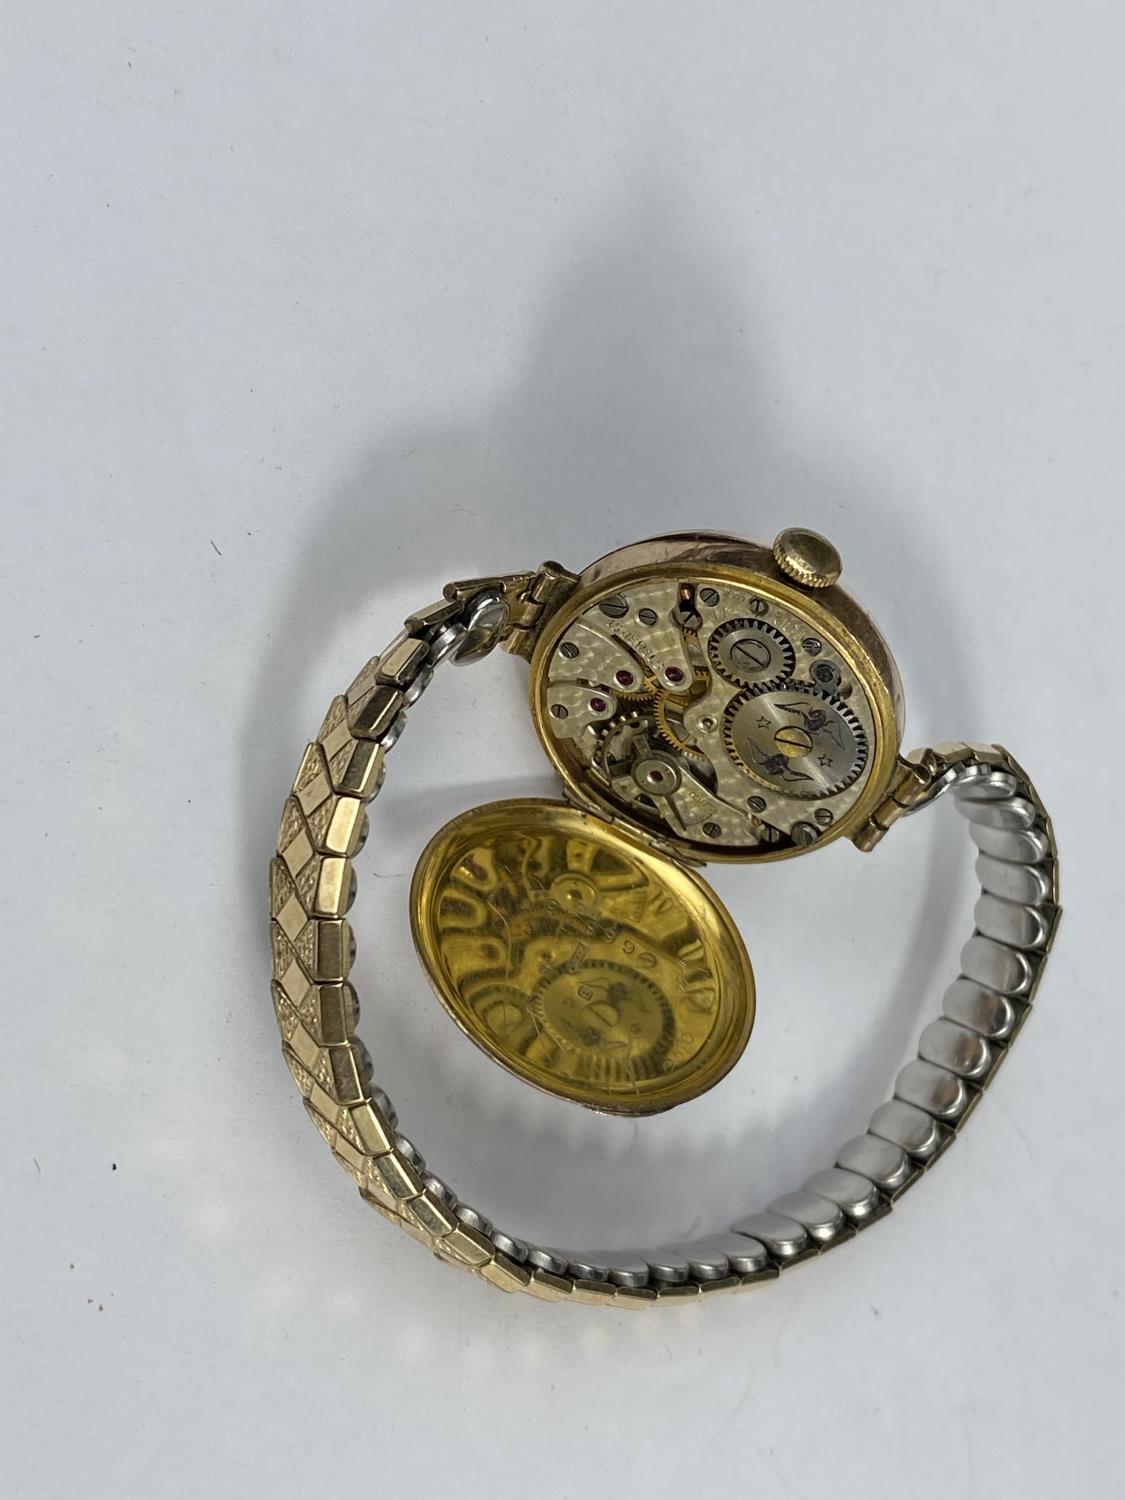 A lady's 9 carat wristwatch with import marks for Glasgow 191, on Excalibur gold plated expanding - Image 2 of 3